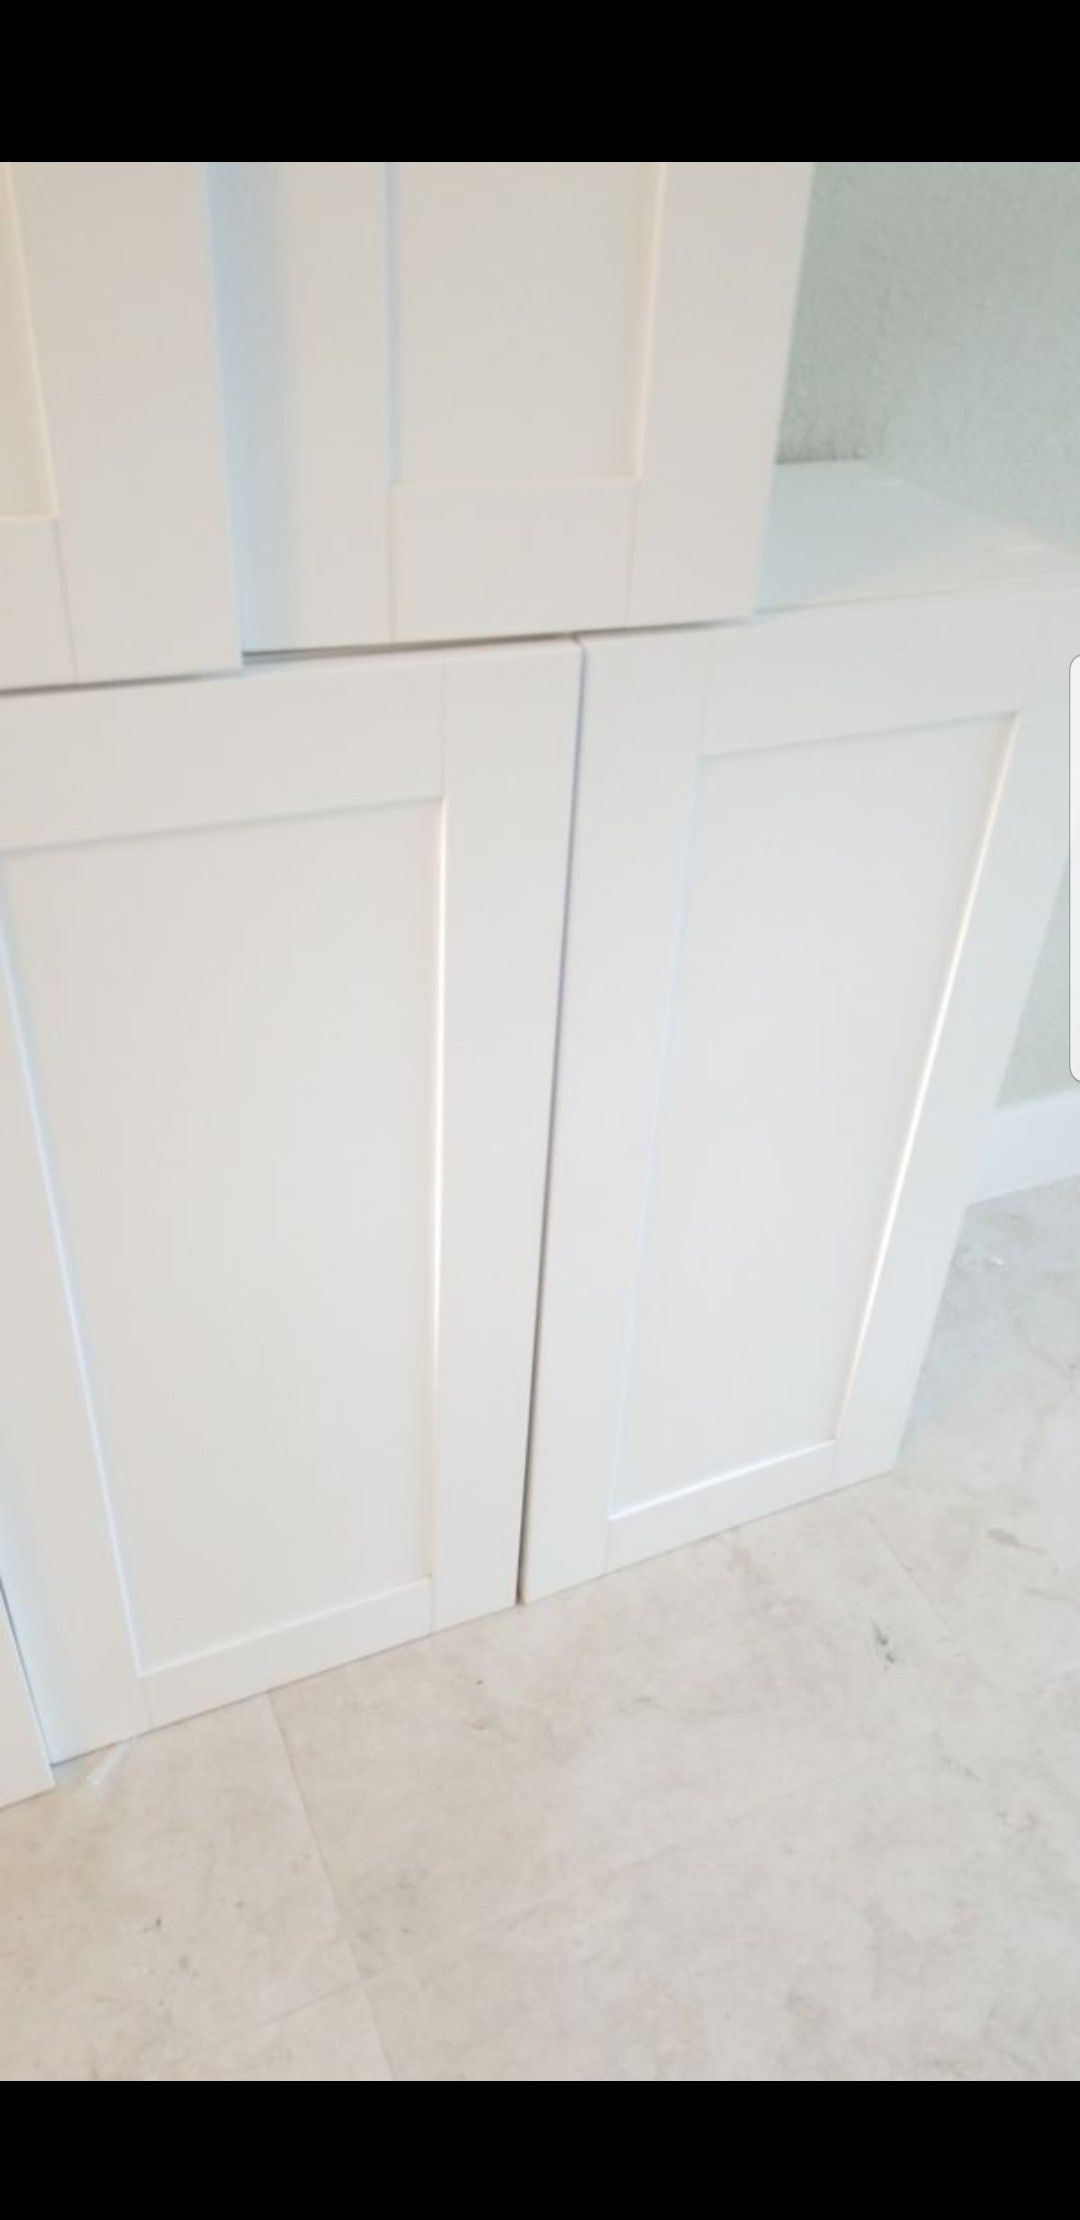 4 Solid Wood Kitchen Cabinets. White Shaker. Brand New